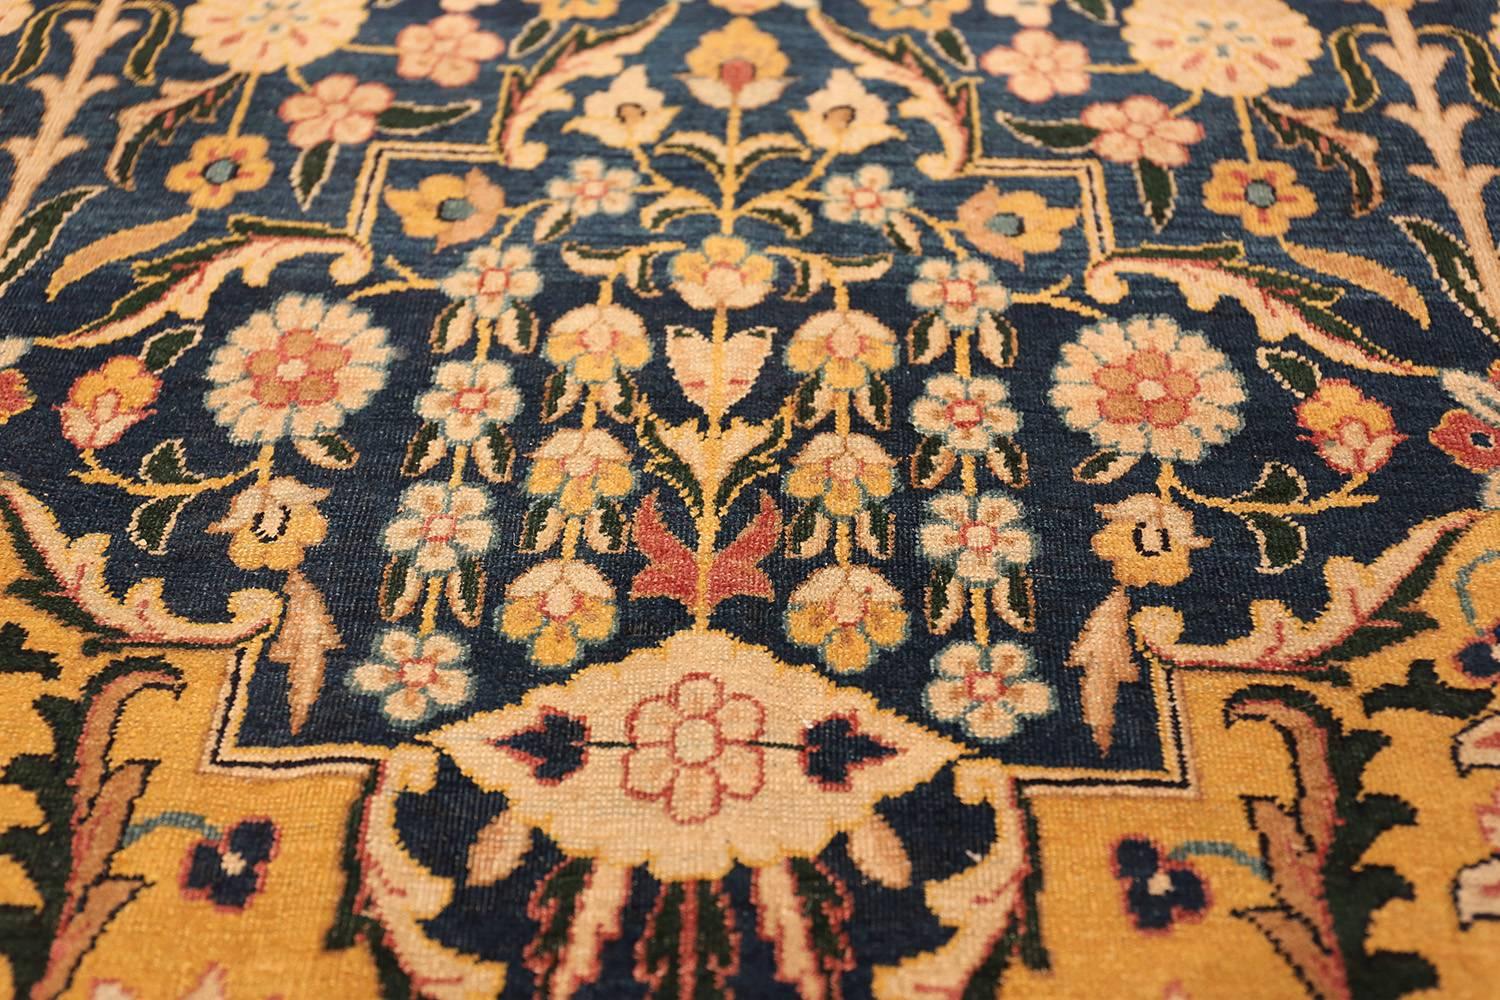 Hand-Knotted Antique Room Size Diamond Design Persian Kerman Rug